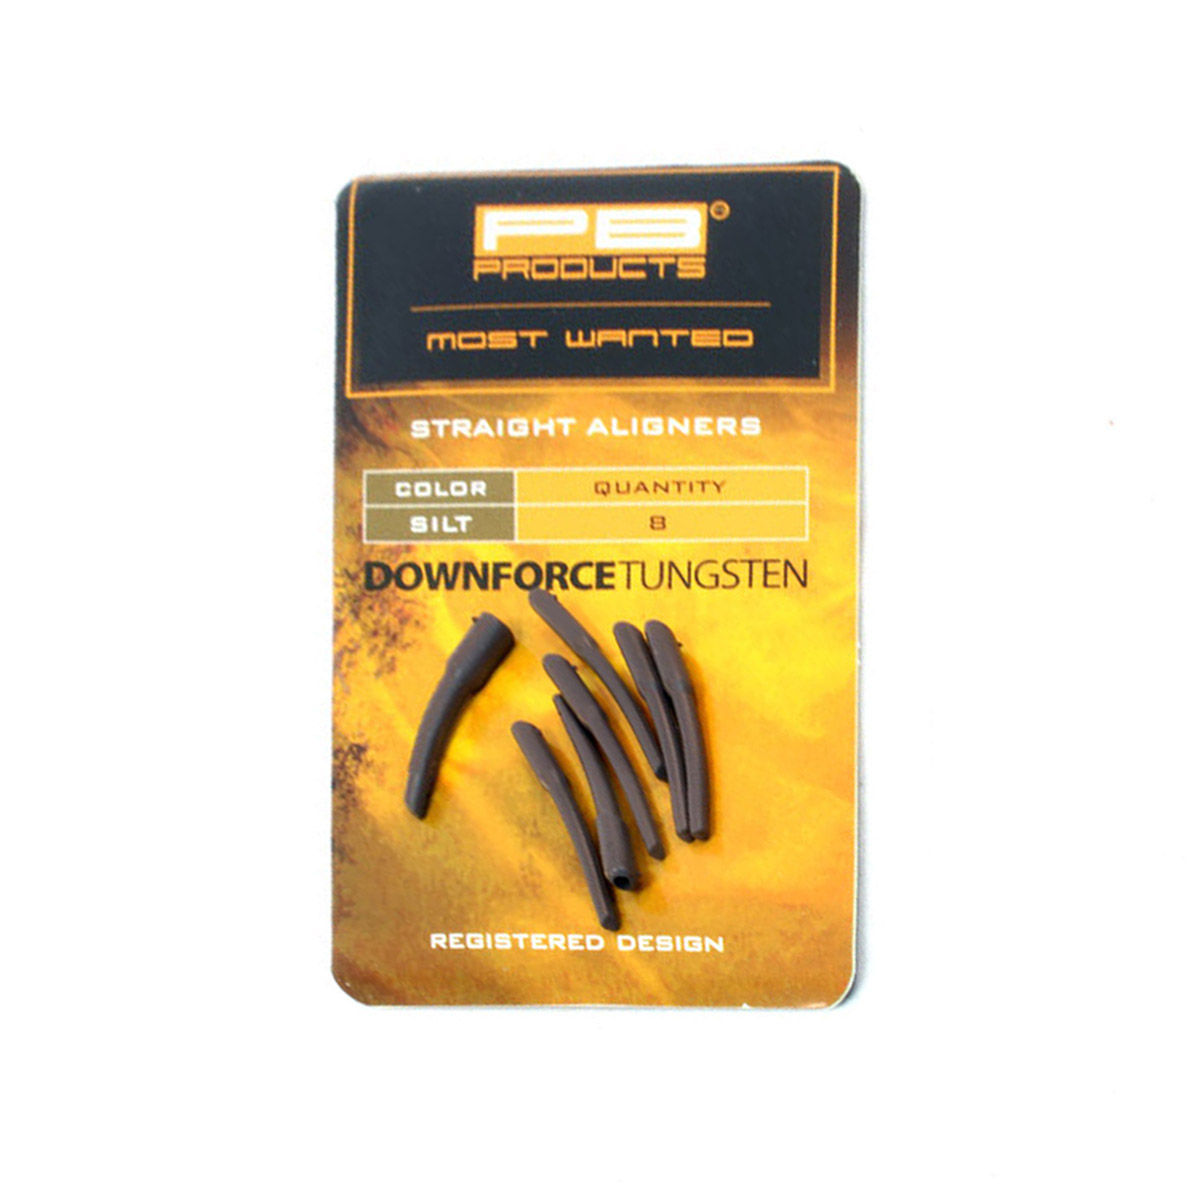 PB Products Downforce Tungsten Straight Aligners -  Silt